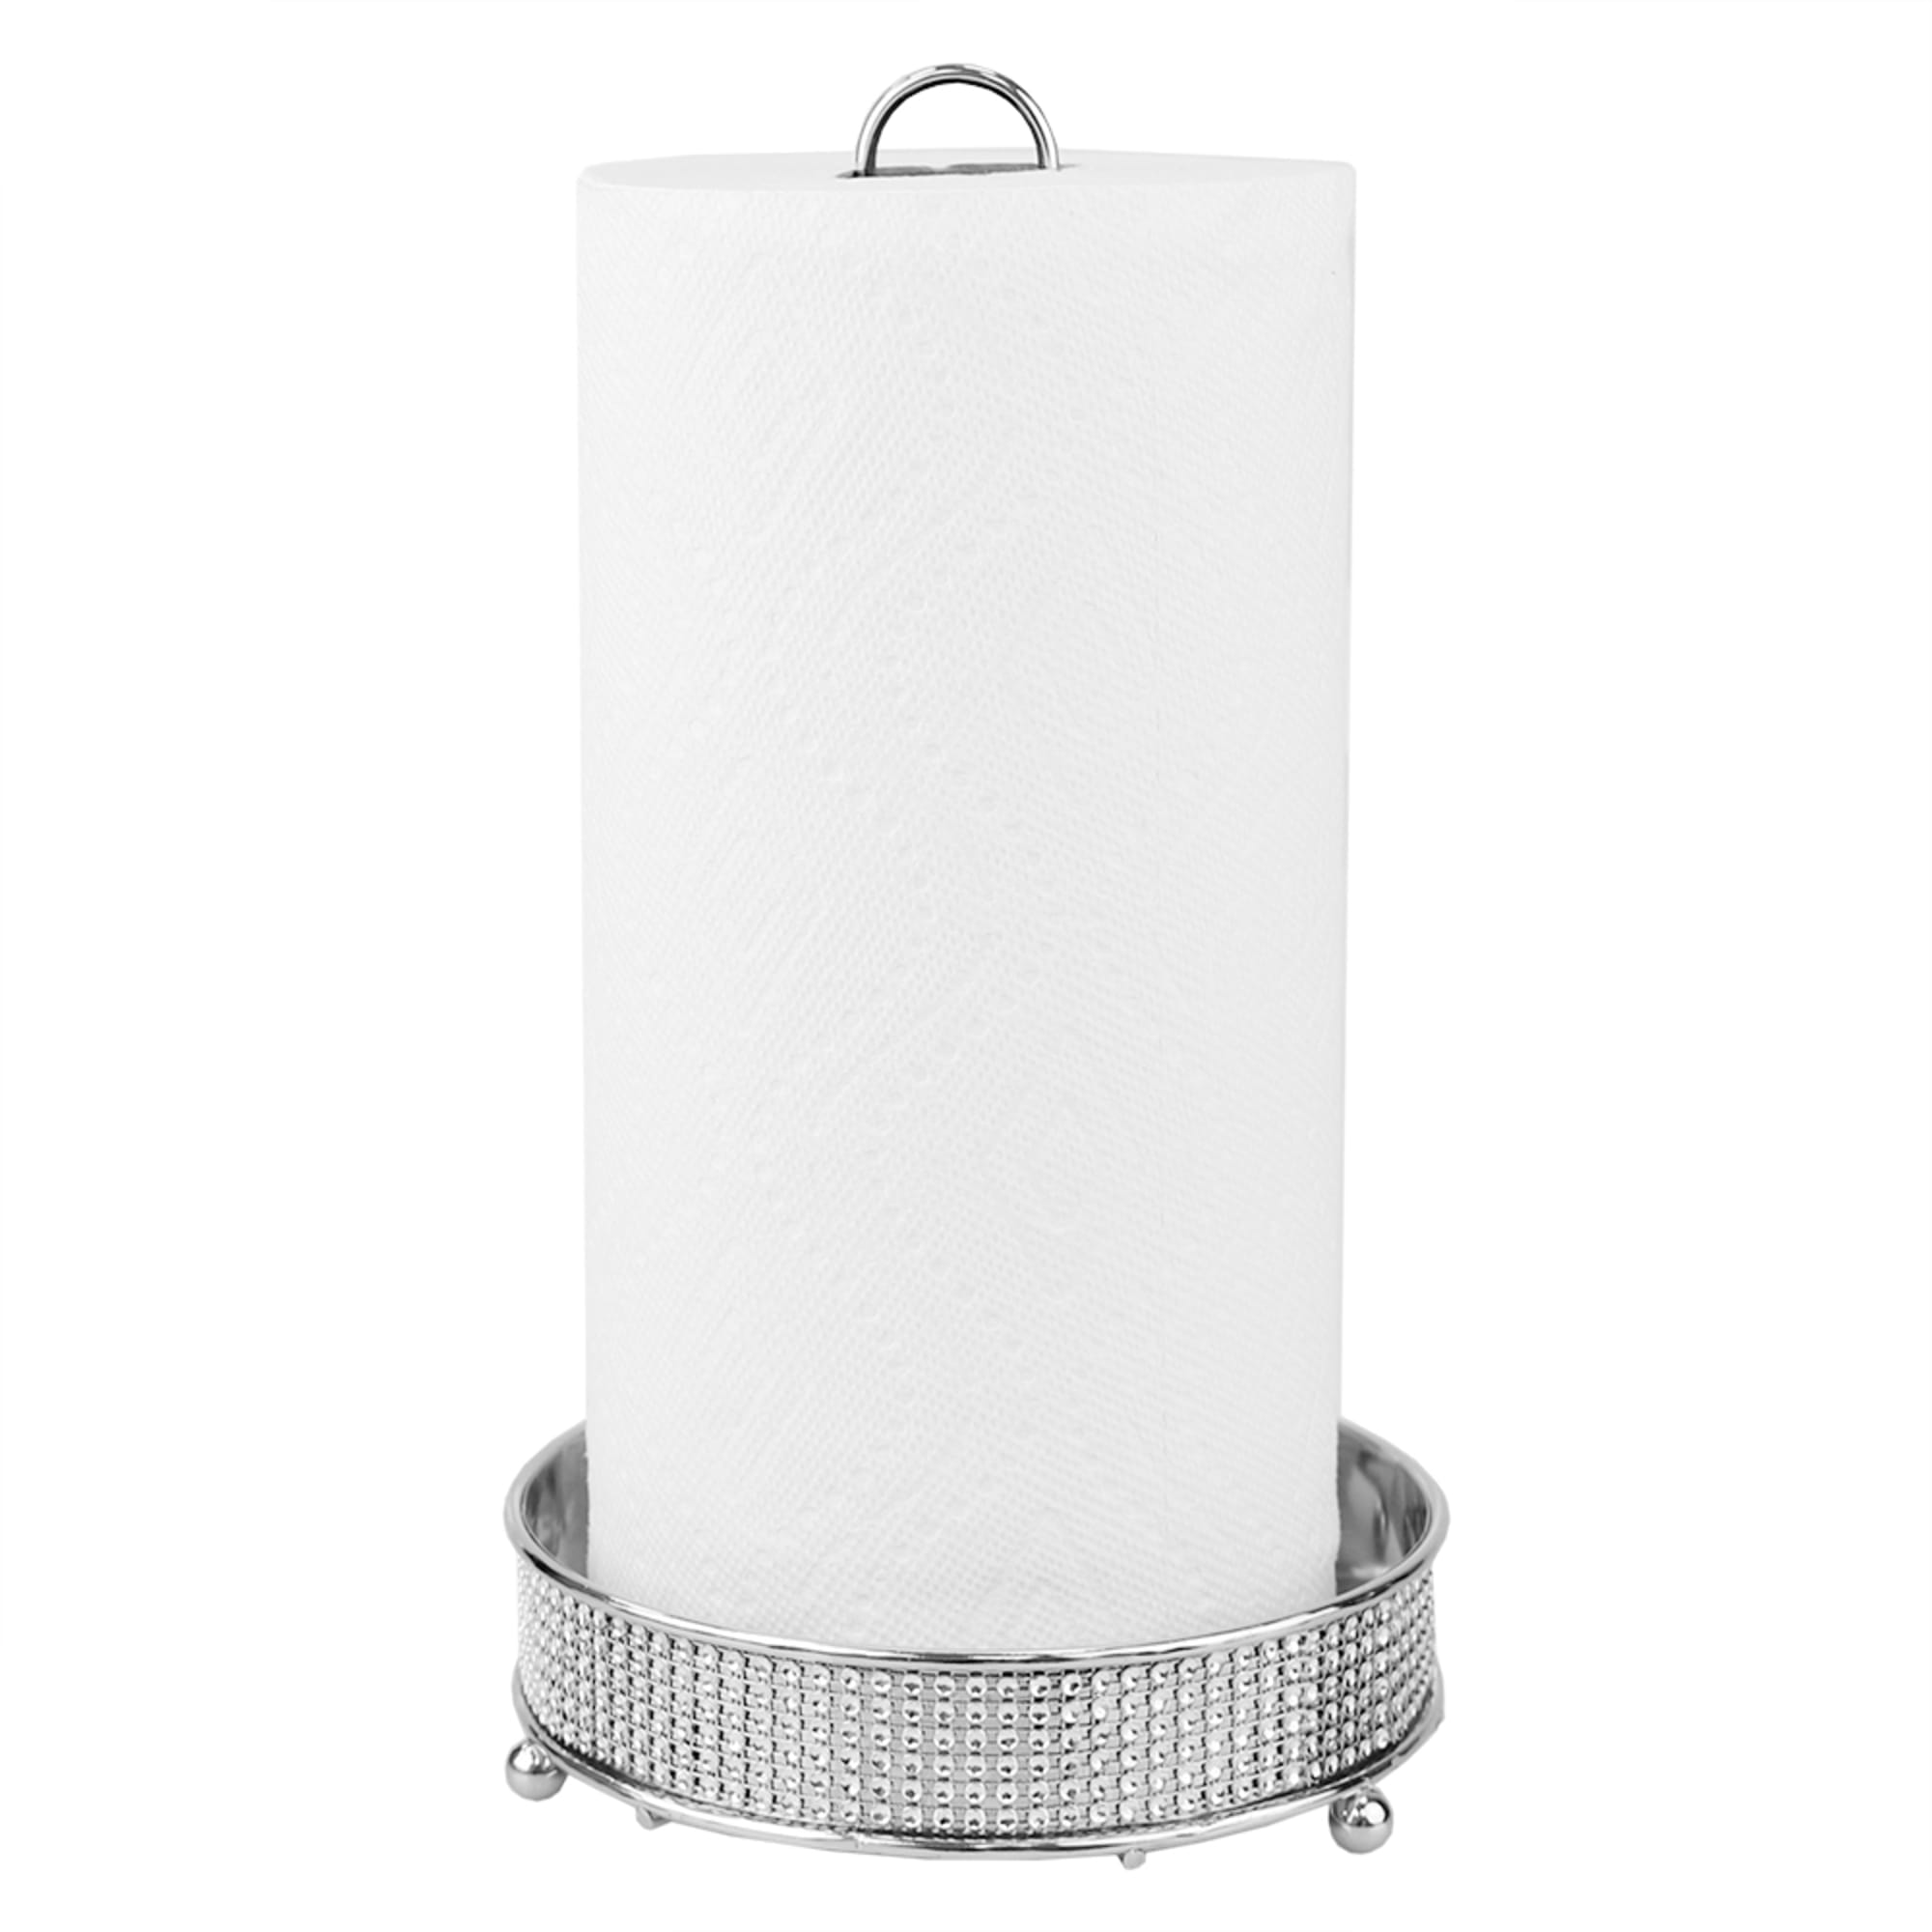 Qiuhome Crystal Paper Towel Holder Countertop Bling Silver Paper Towel  Holder Stand